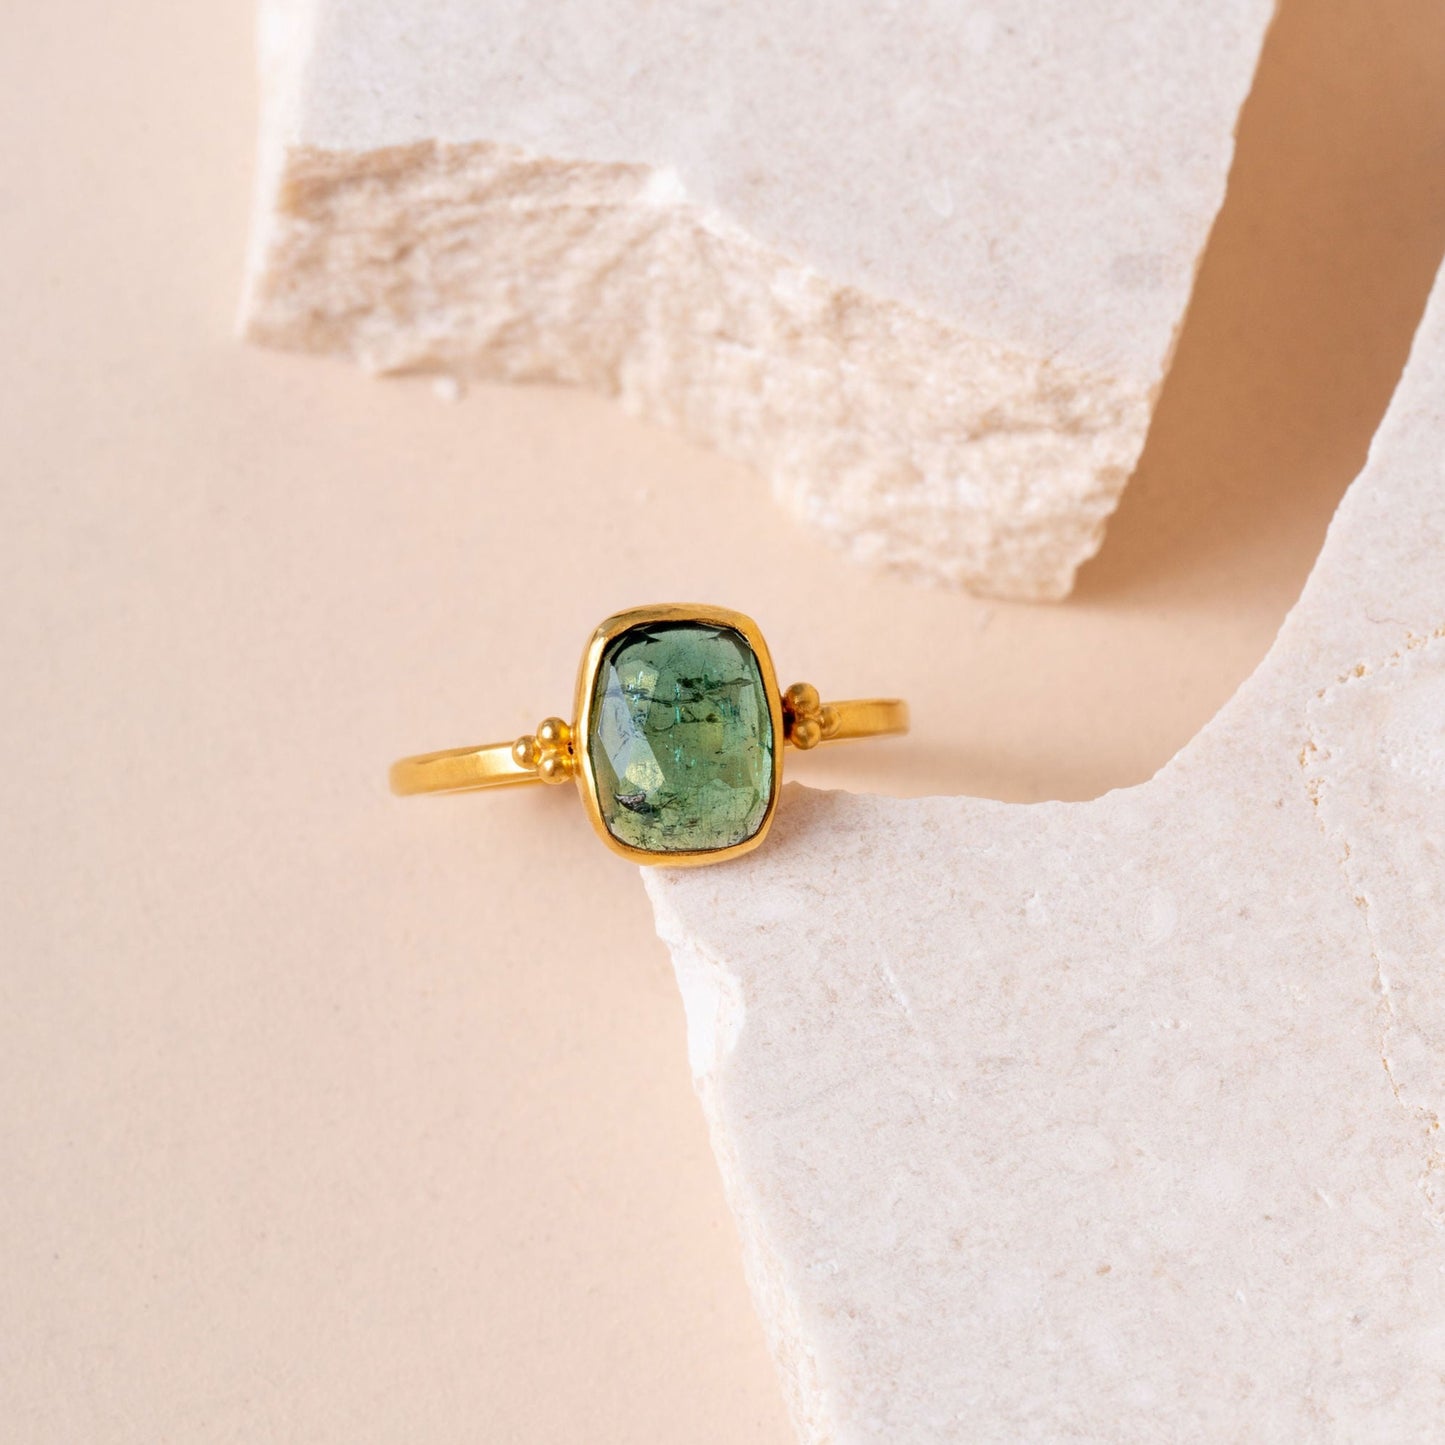 Solo shot of a captivating gold ring, expertly crafted with granulation details and featuring a mesmerizing green tourmaline gemstone.